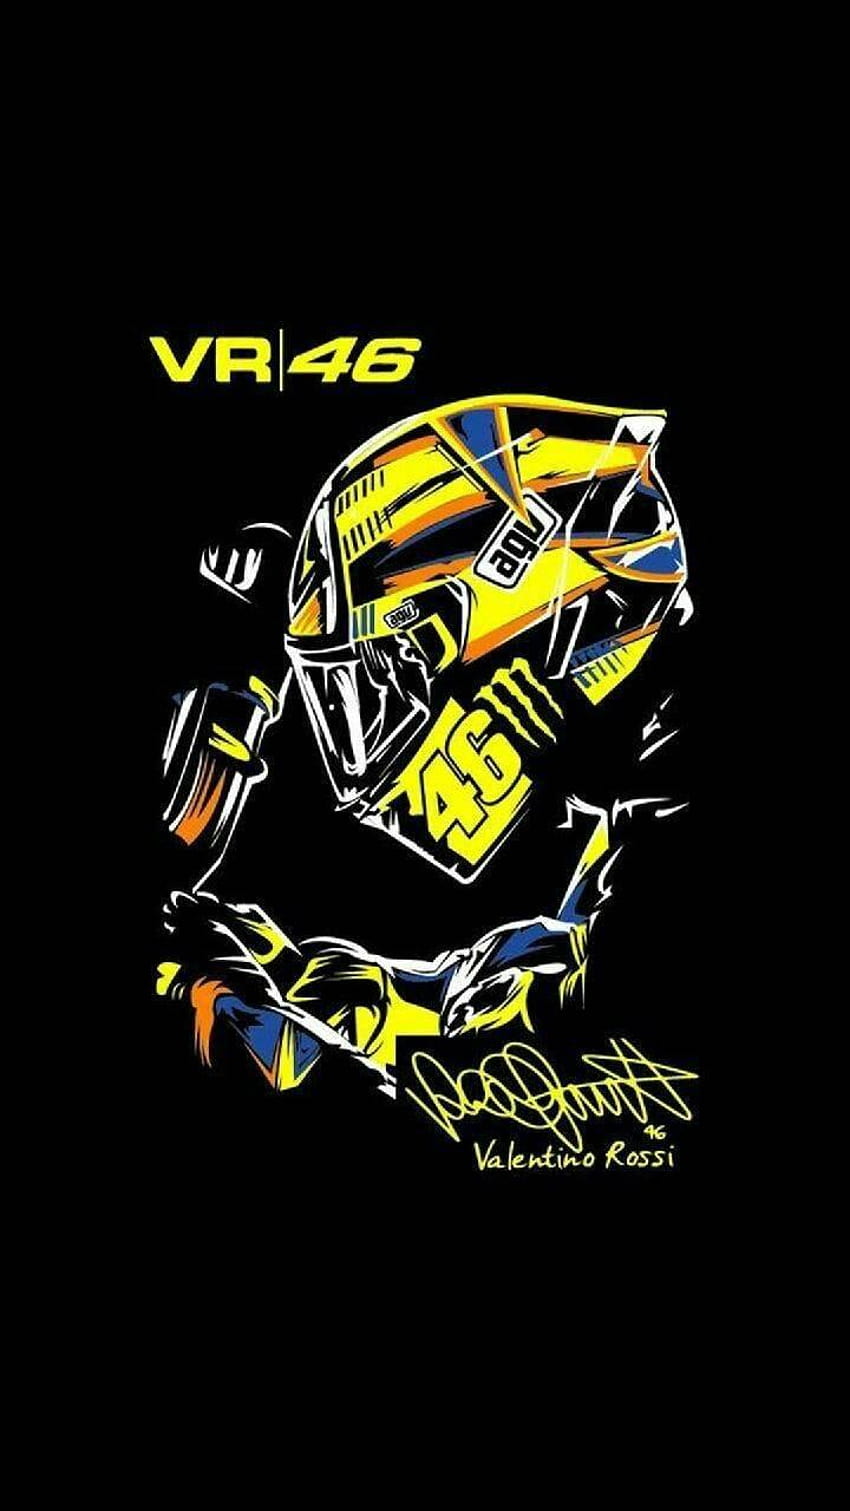 Vr 46 by imdns_46, vr46 android HD phone wallpaper